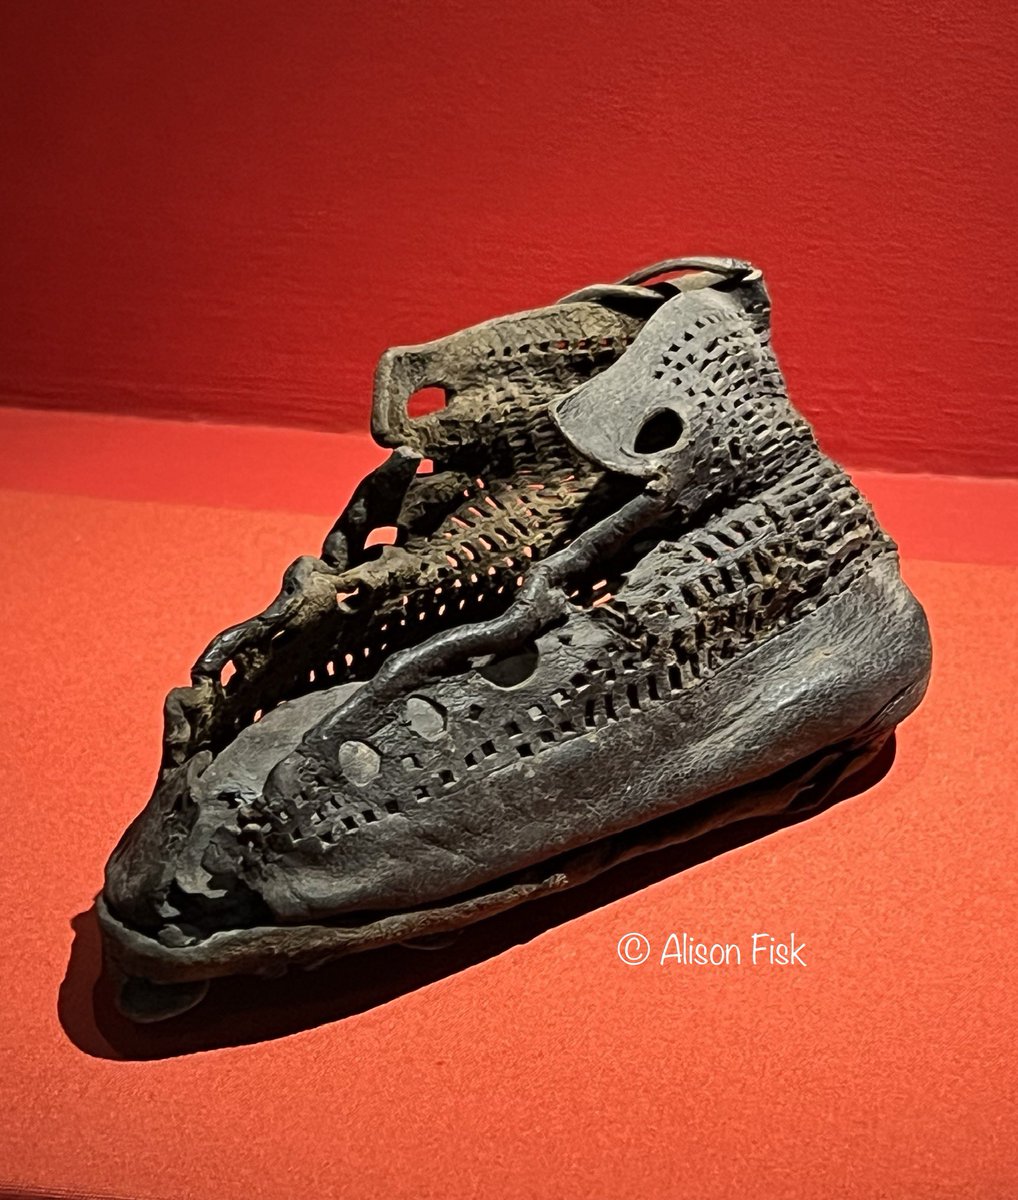 A tiny 2,000 year-old Roman leather baby boot. Excavated from the Commanding Officer’s residence at Vindolanda fort. Dated to around AD 100, when Flavius Cerialis, prefect of the ninth cohort of Batavians, lived at the fort with his family. #RomanFortThursday #Archaeology